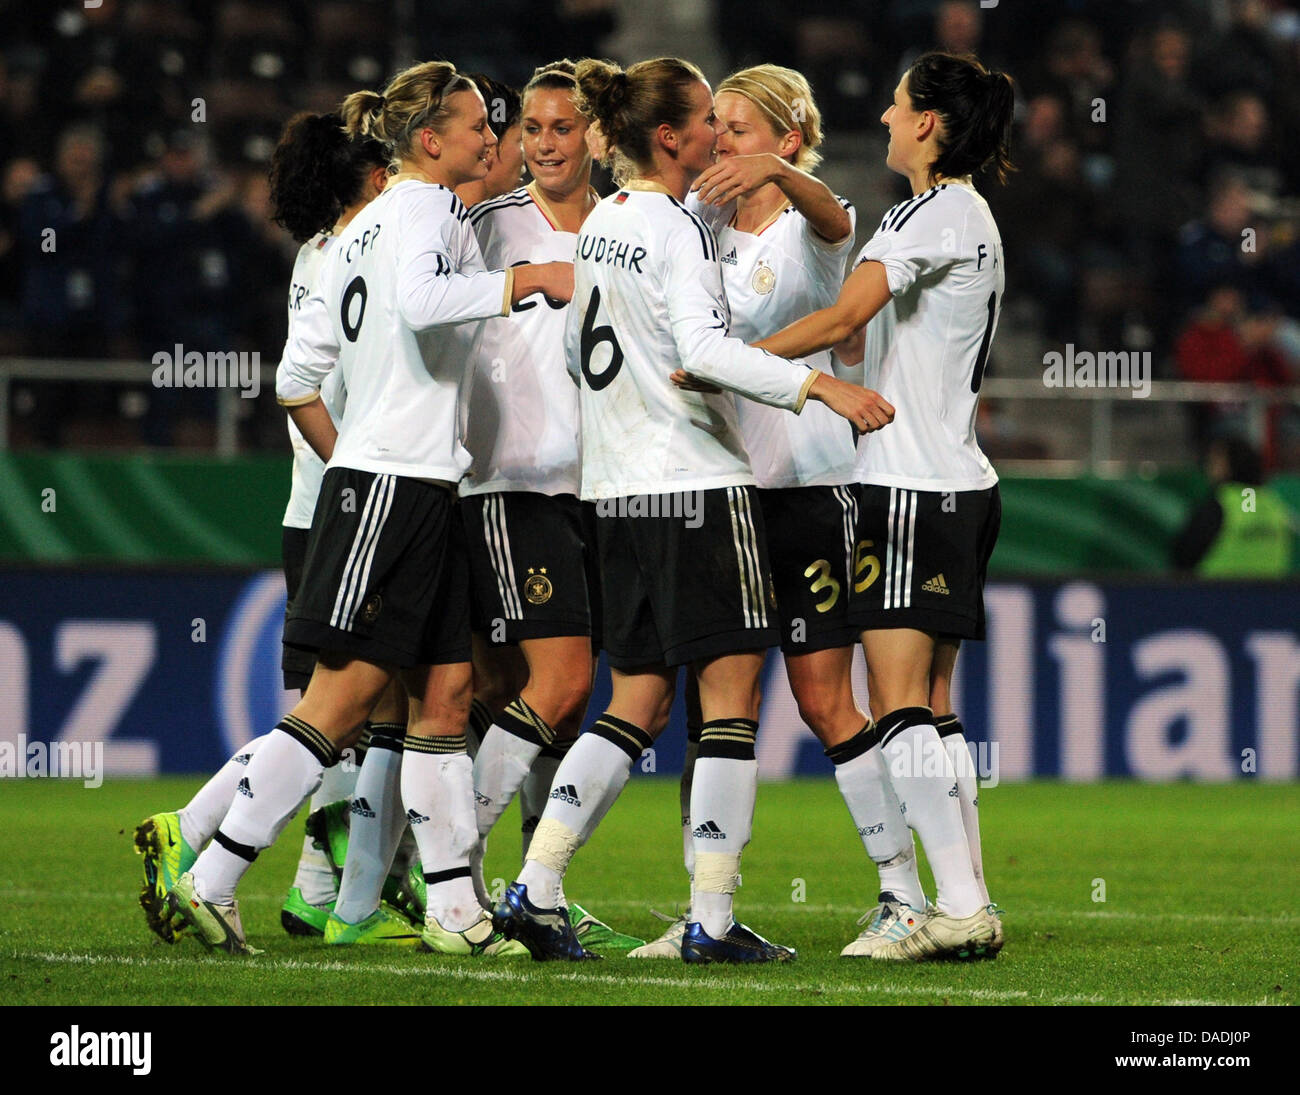 Germany's players celebrate after their teammate Alexandra Popp (L) scores the 1-0 lead goal during the international women's soccer test match between Germany and Sweden at the Millerntor-Stadion in Hamburg, Germany, 26 October 2011. Photo: Angelika Warmuth Stock Photo